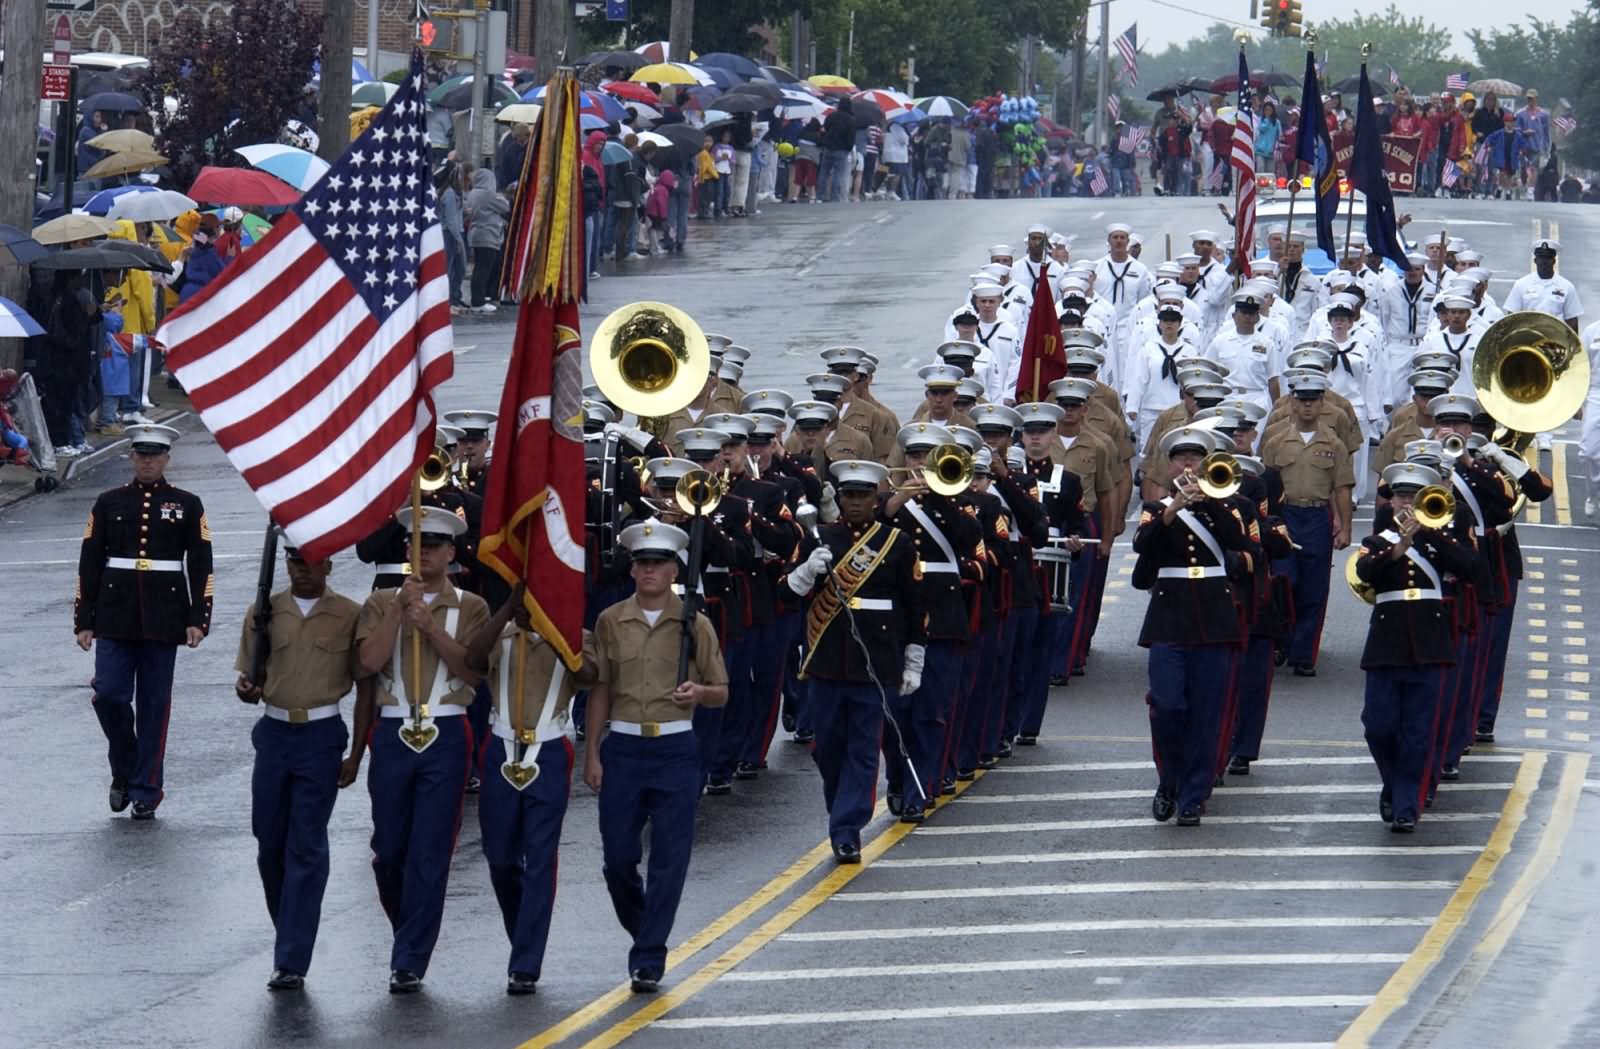 Marines-And-Sailors-March-In-Memorial-Day-Parade.jpg